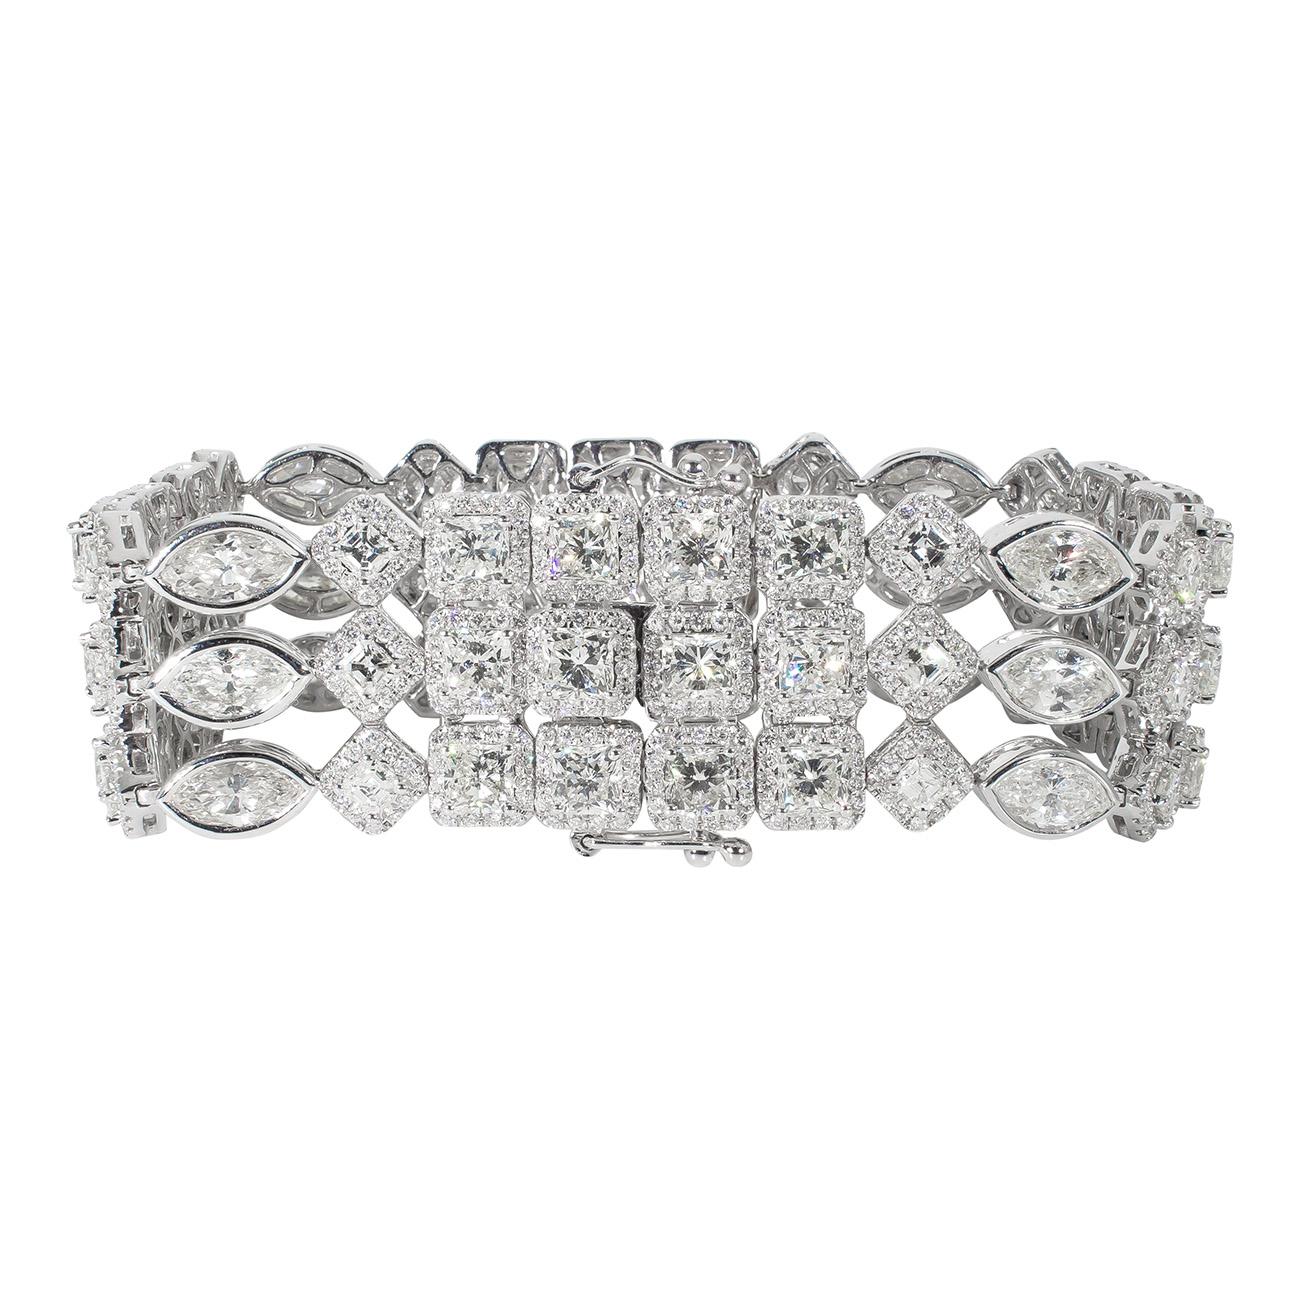 Designer bracelet in 18K white gold with multi-row French pave set rounds around cushion cuts, asscher cuts, and marquise diamonds. D30.56ct.t.w.